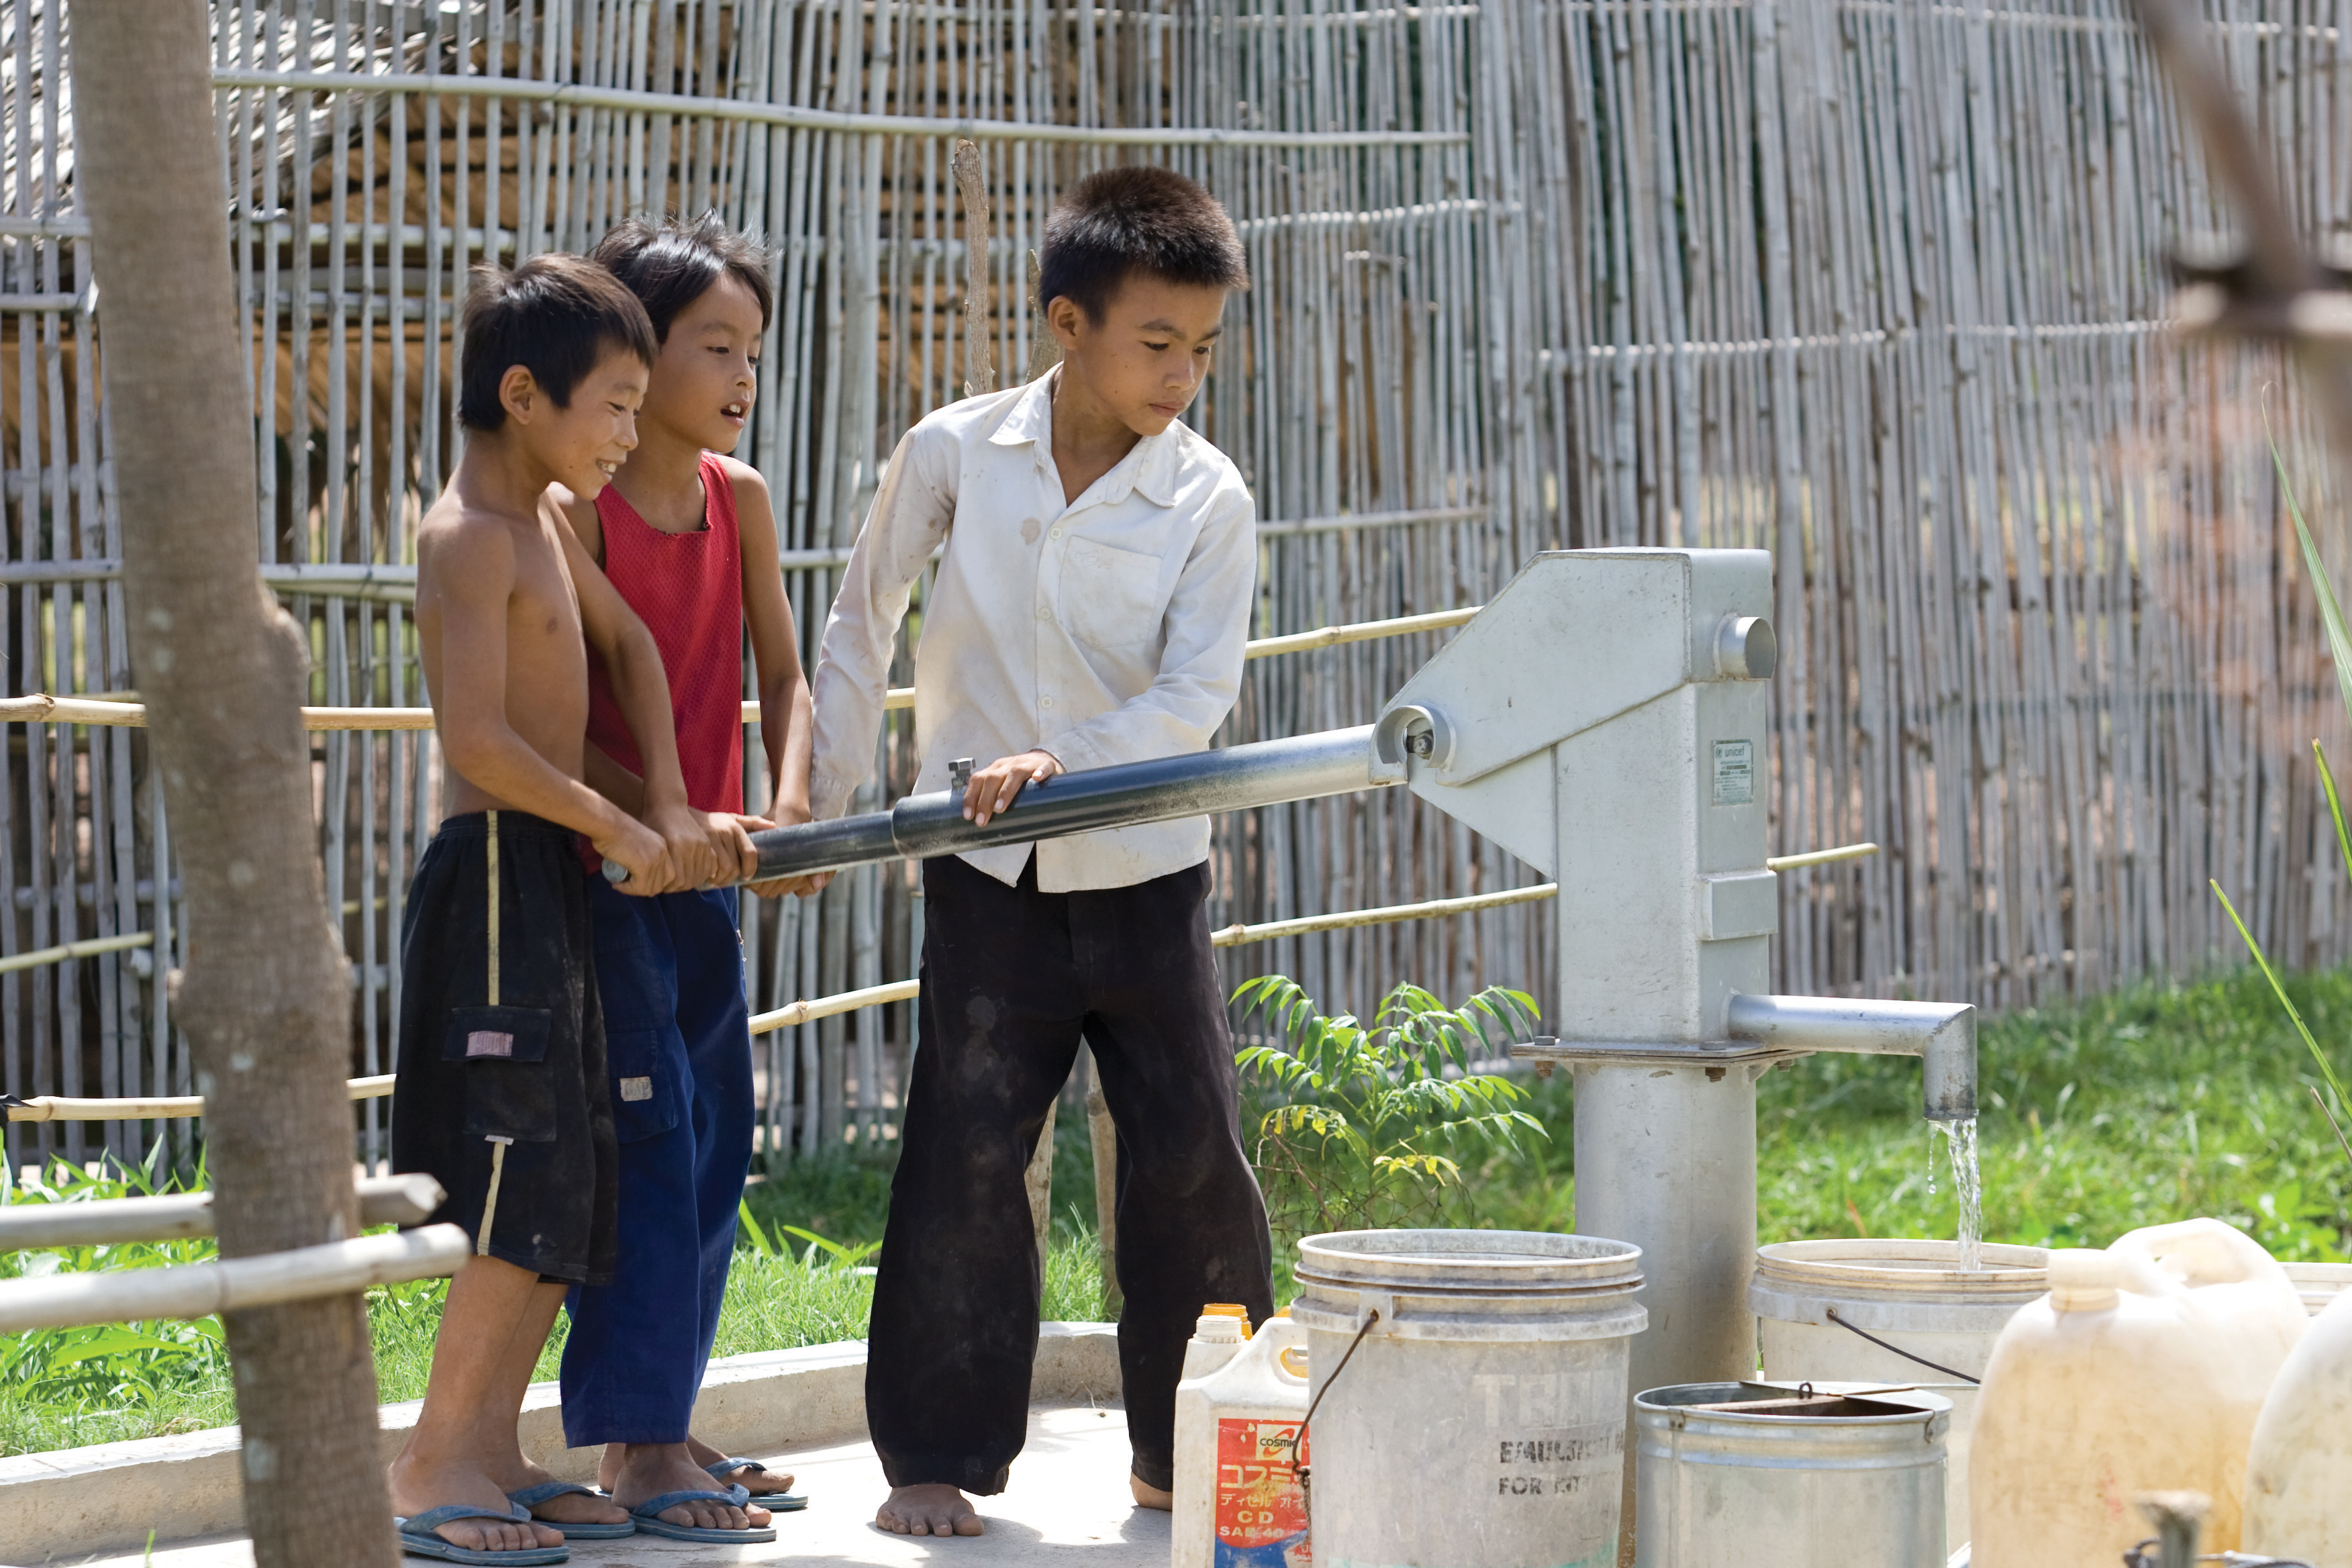 Three young boys in Cambodia standing and pumping clean water into a bucket from a metal hand-operated pump.